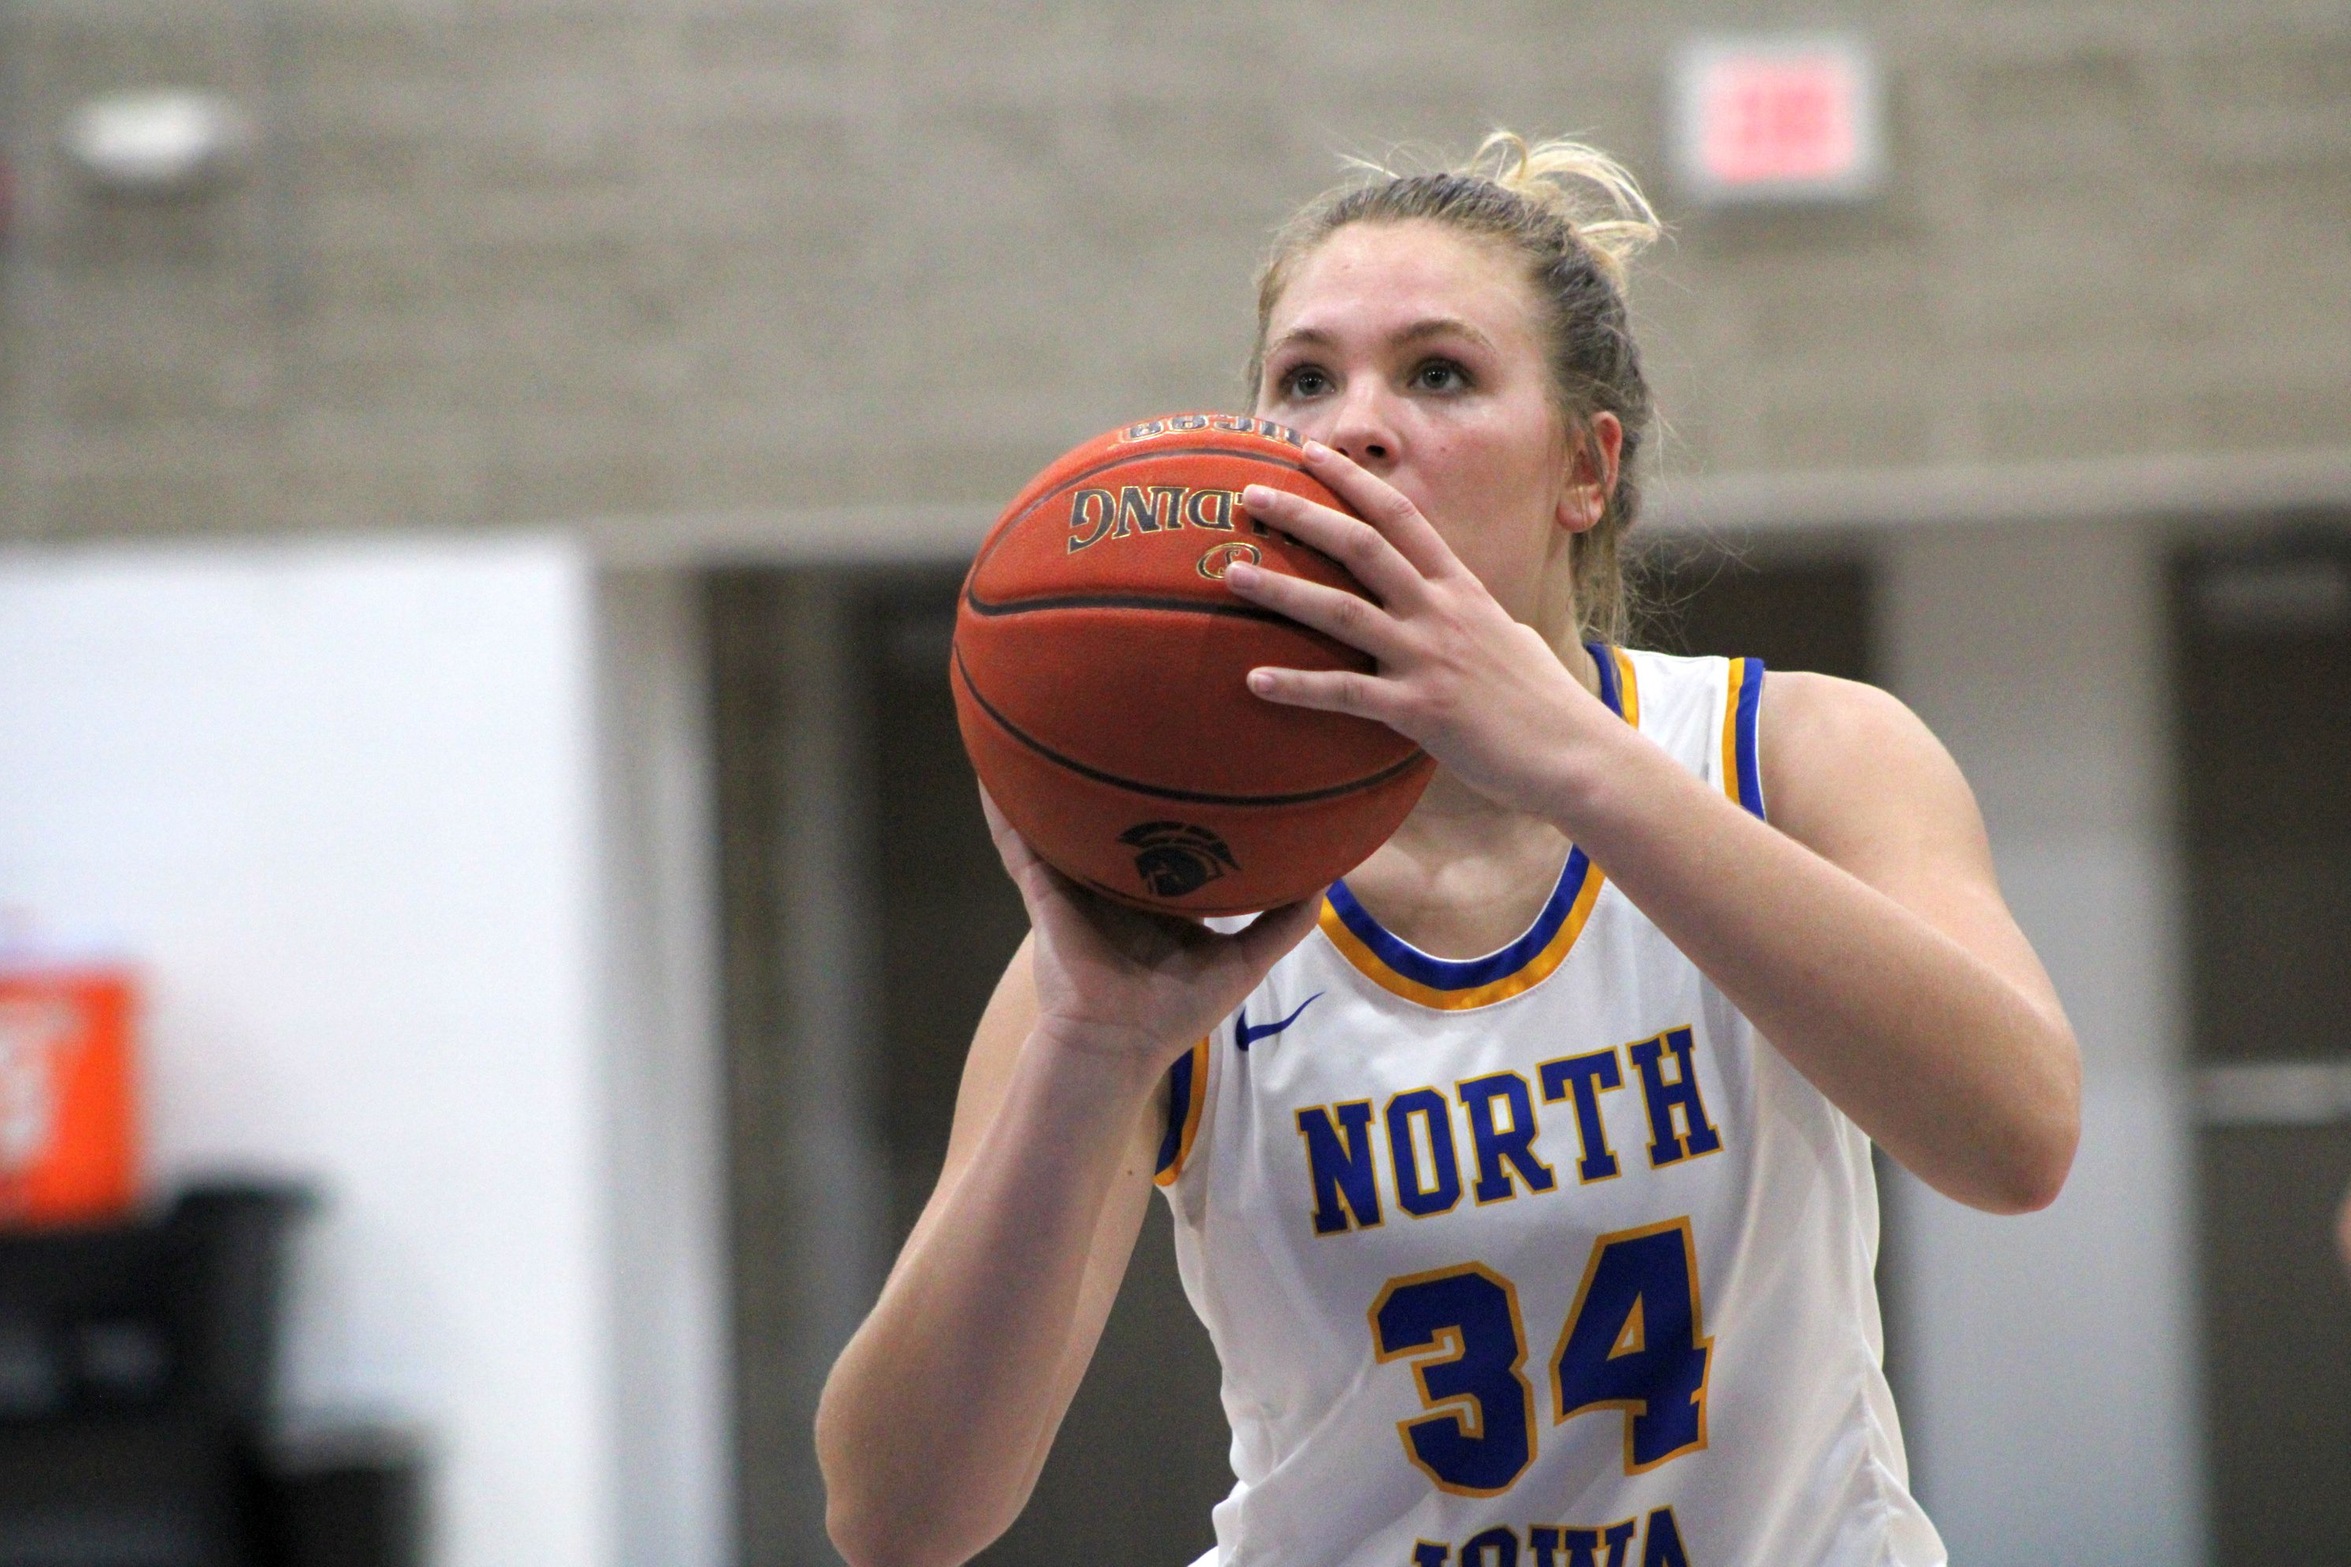 NIACC's Madison Hillman shoots a free throw against the William Penn Junior Varsity on Nov. 7 in the NIACC gym.